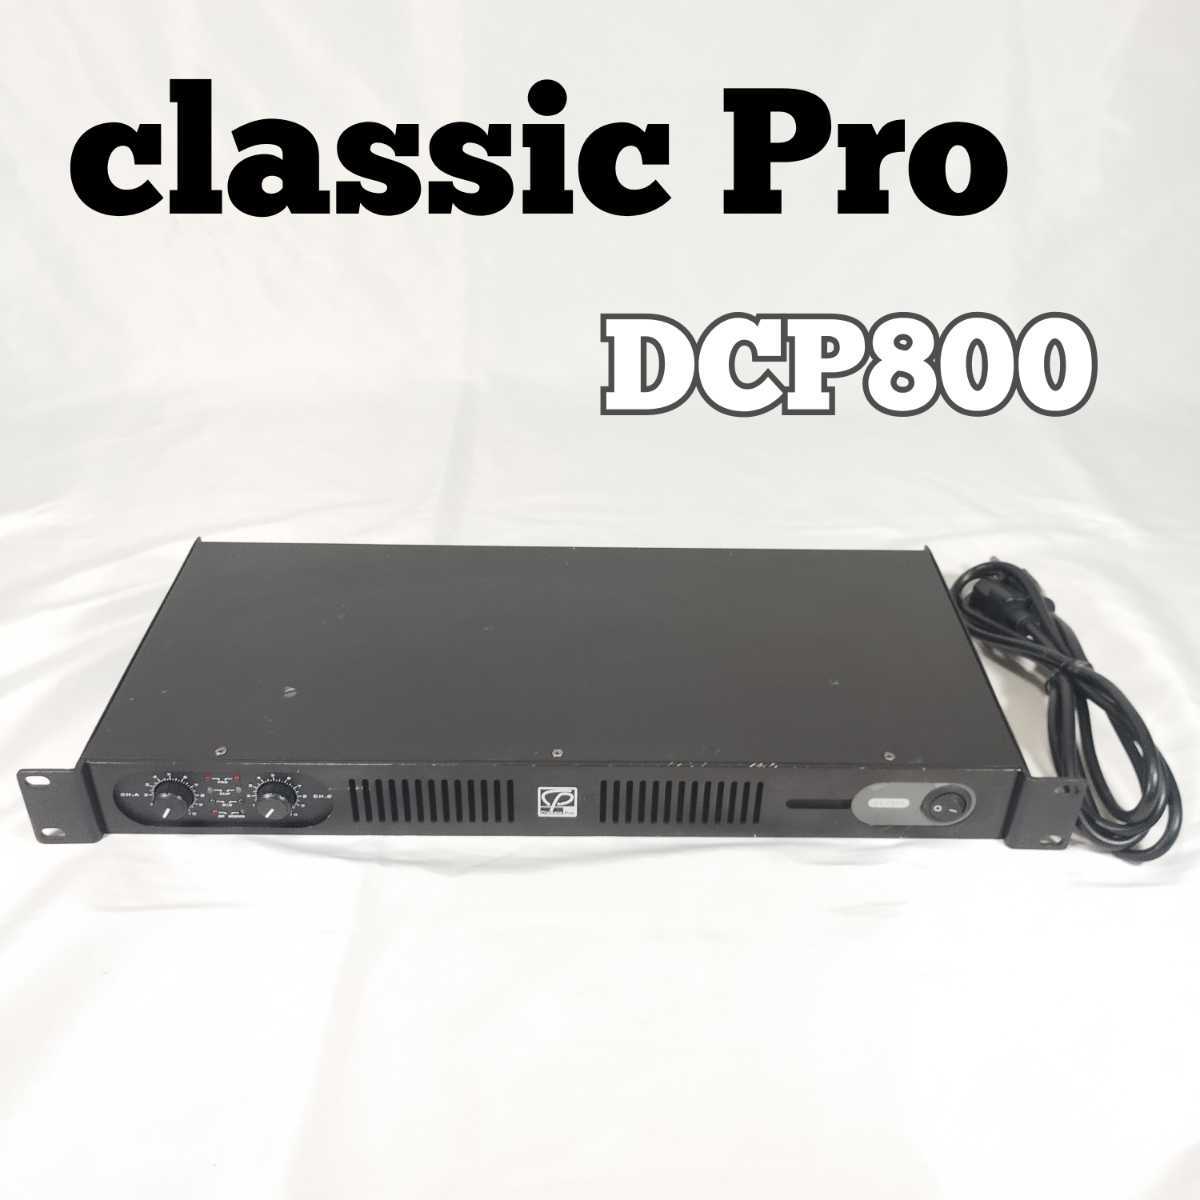 CLASSIC PRO DCP800 ステレオパワーアンプ クラシックプロ